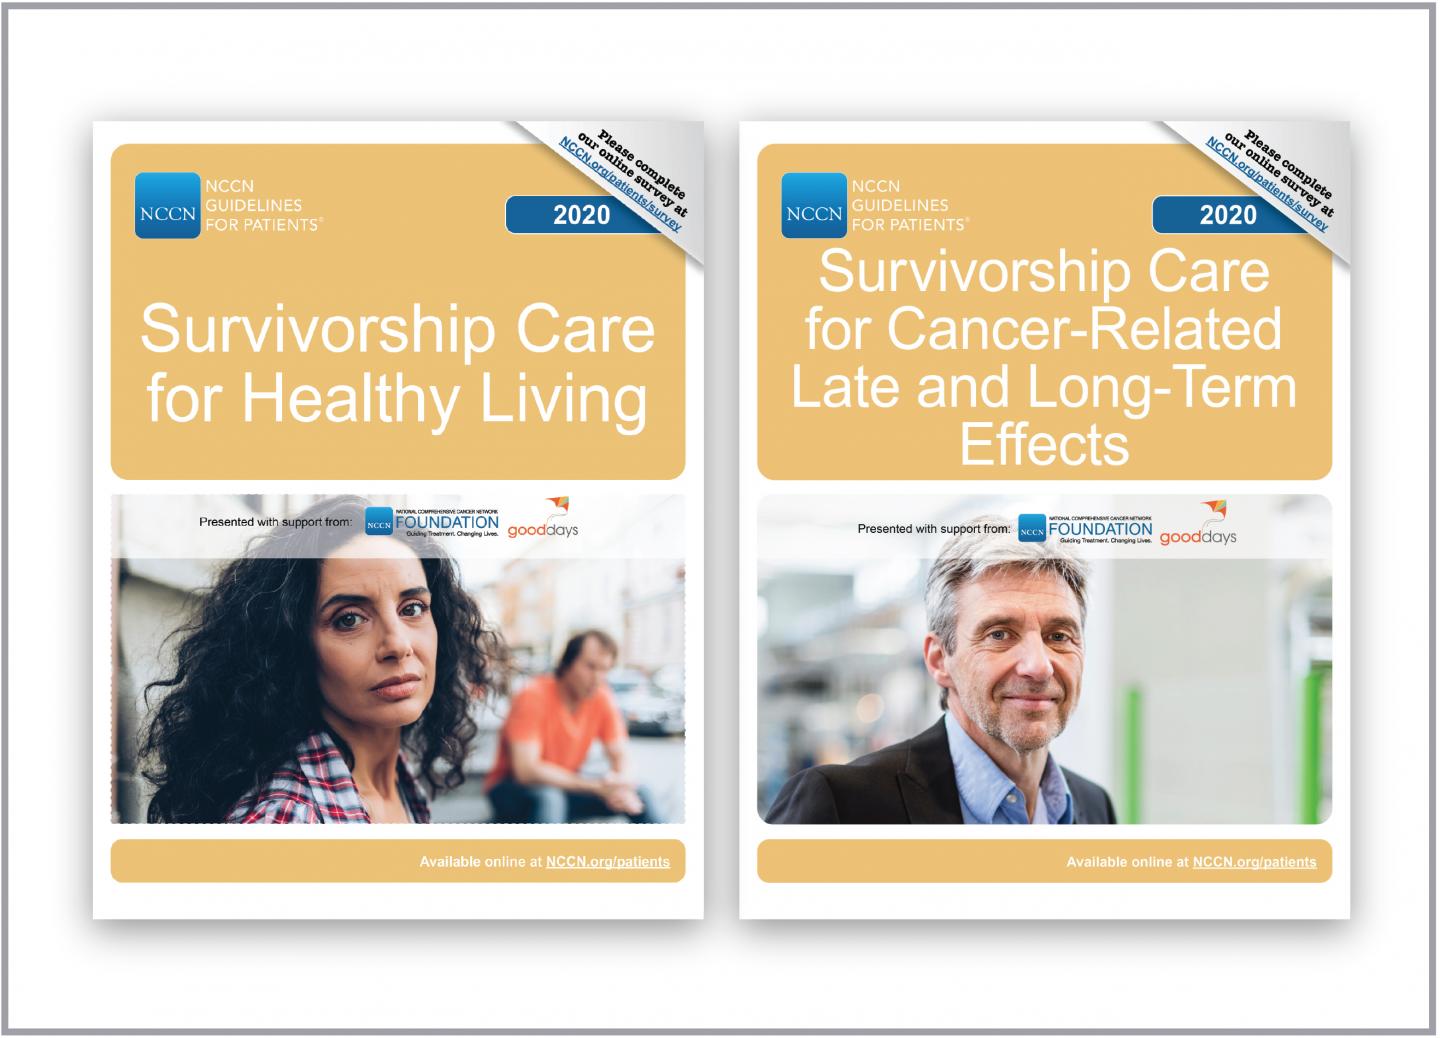 NCCN Guidelines for Patients: Survivorship series available at NCCN.org/patients